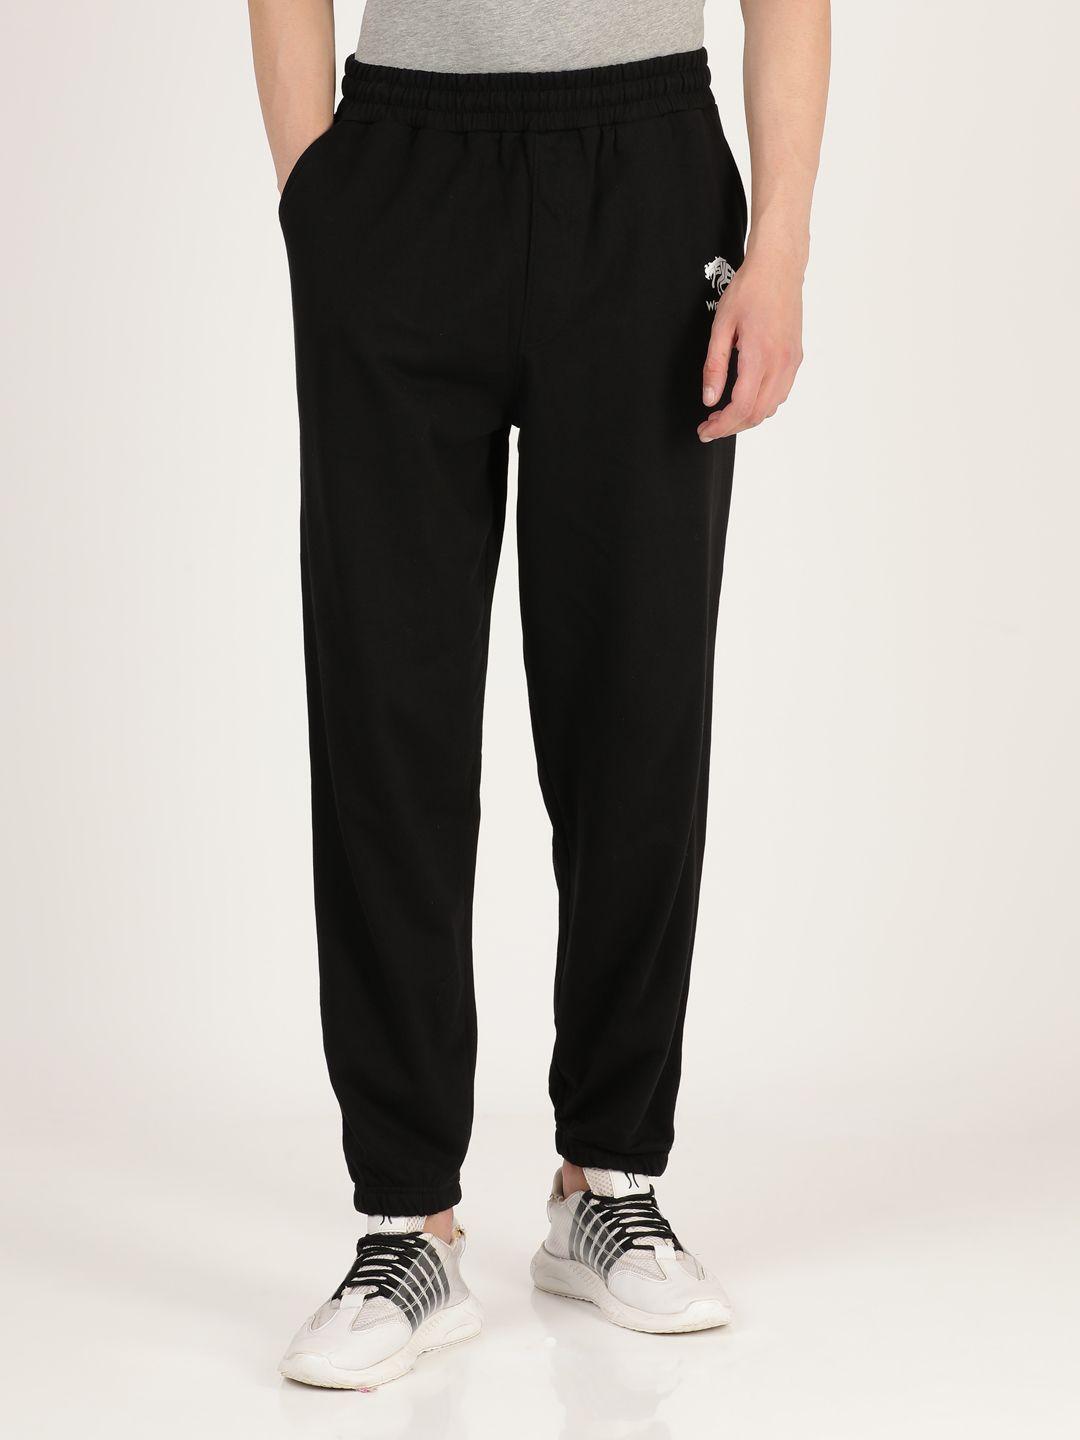 wrangler-men-black-solid-relaxed-fit-pure-cotton-joggers